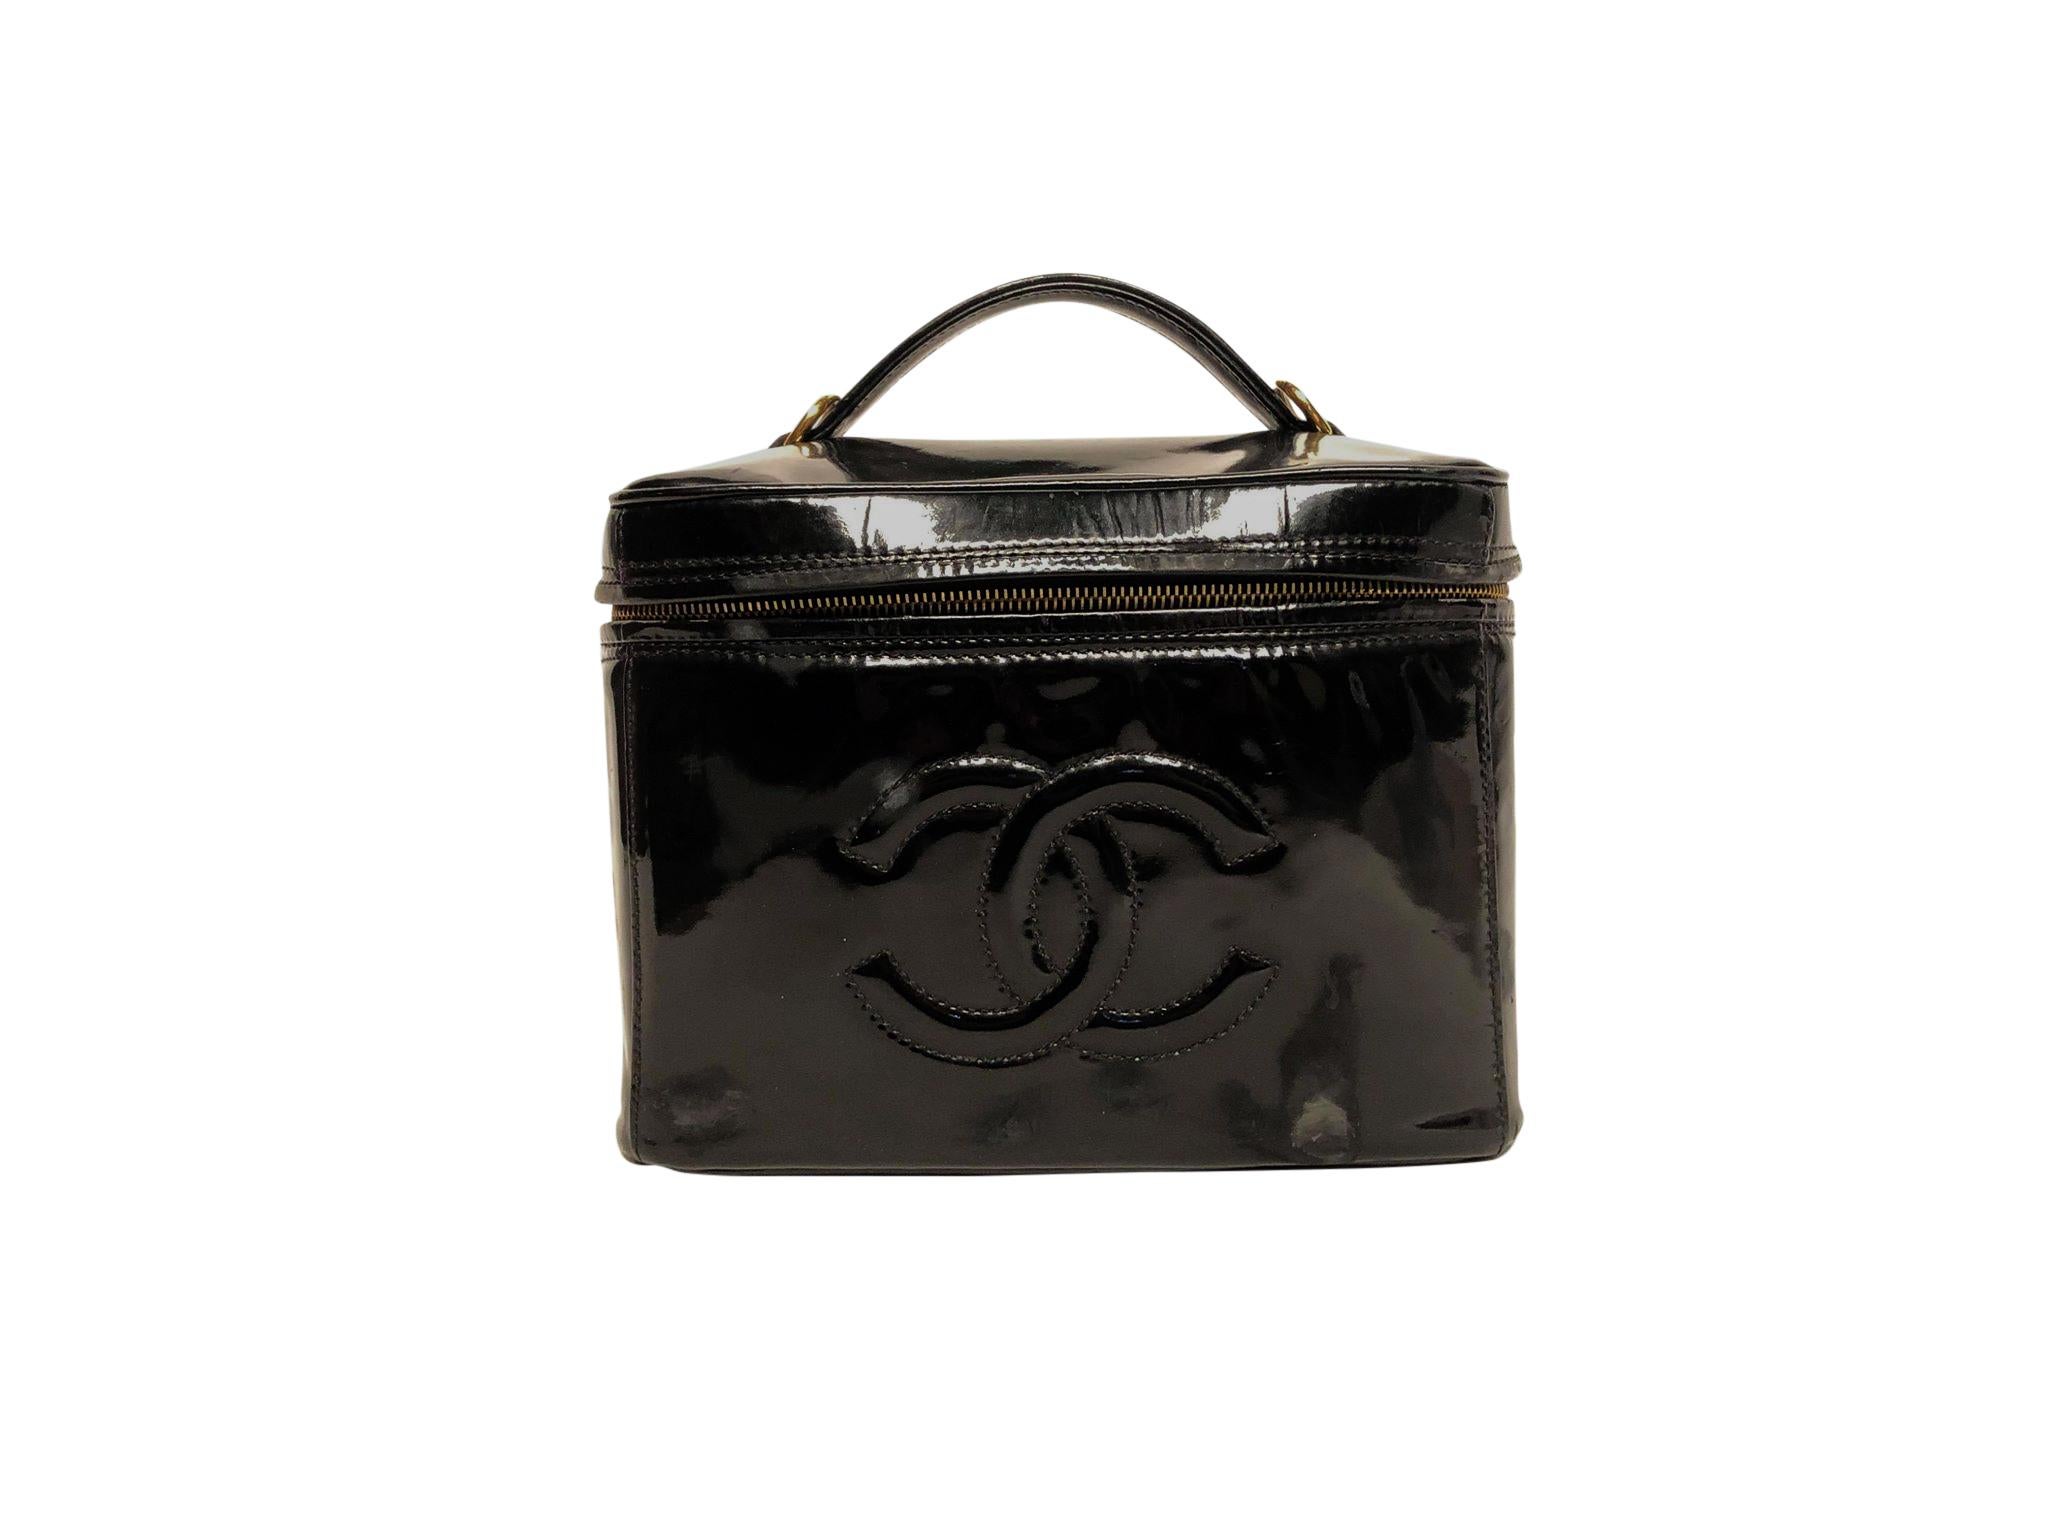 Extremely chic vintage CHANEL patent leather structured makeup case with detachable shoulder strap, top handle and gold toned hardware. This gorgeous cosmetic case features a smooth leather interior and dual wrap around zip opening. This vanity case